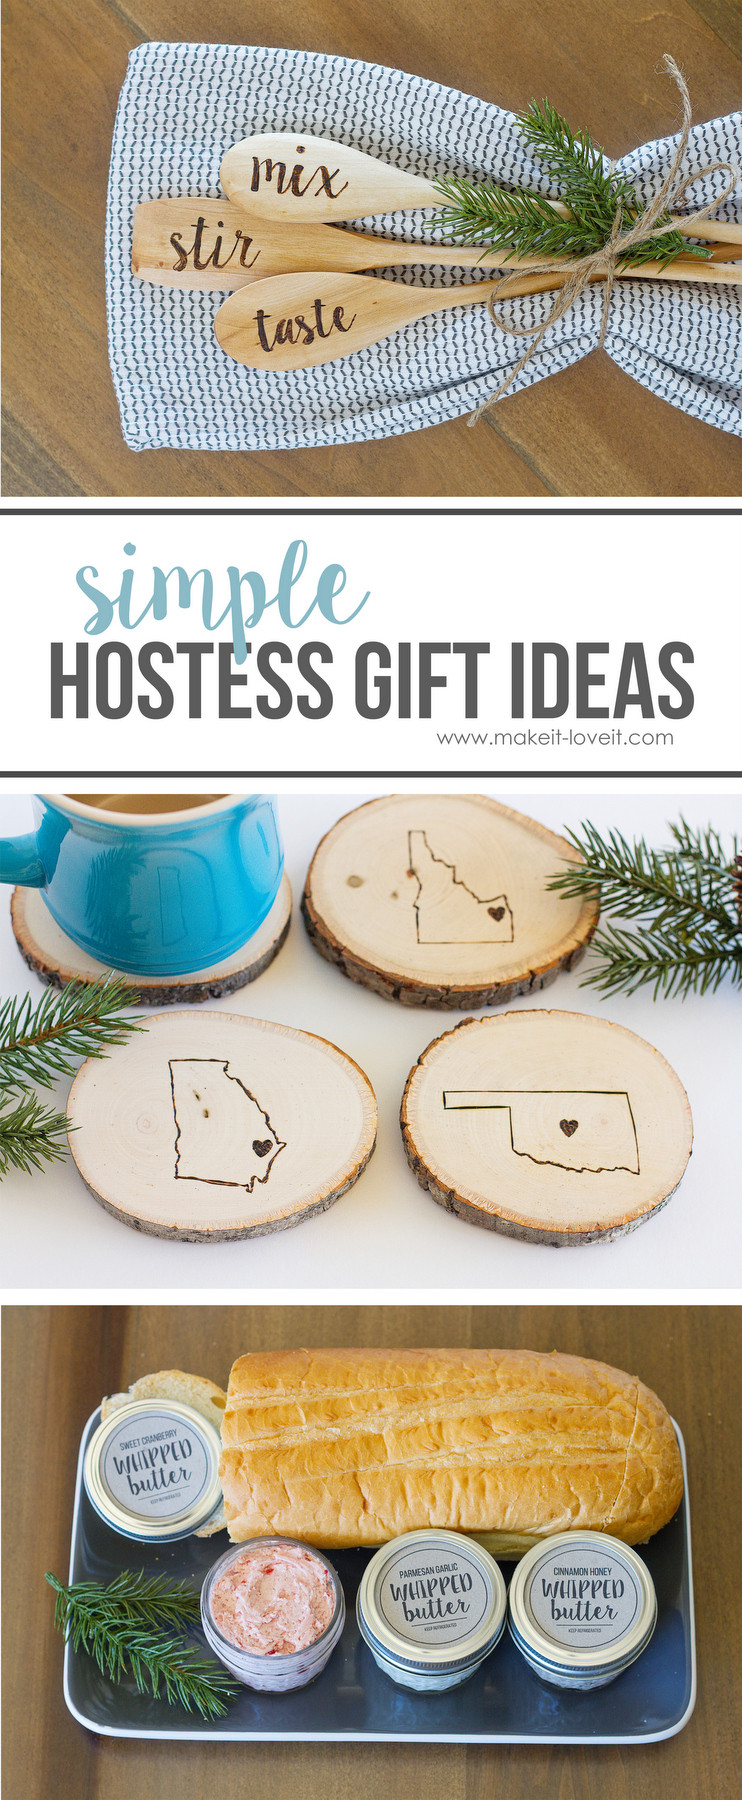 Christmas Hostess Gift Ideas
 Simple HOSTESS GIFT IDEAS flavored butters engraved